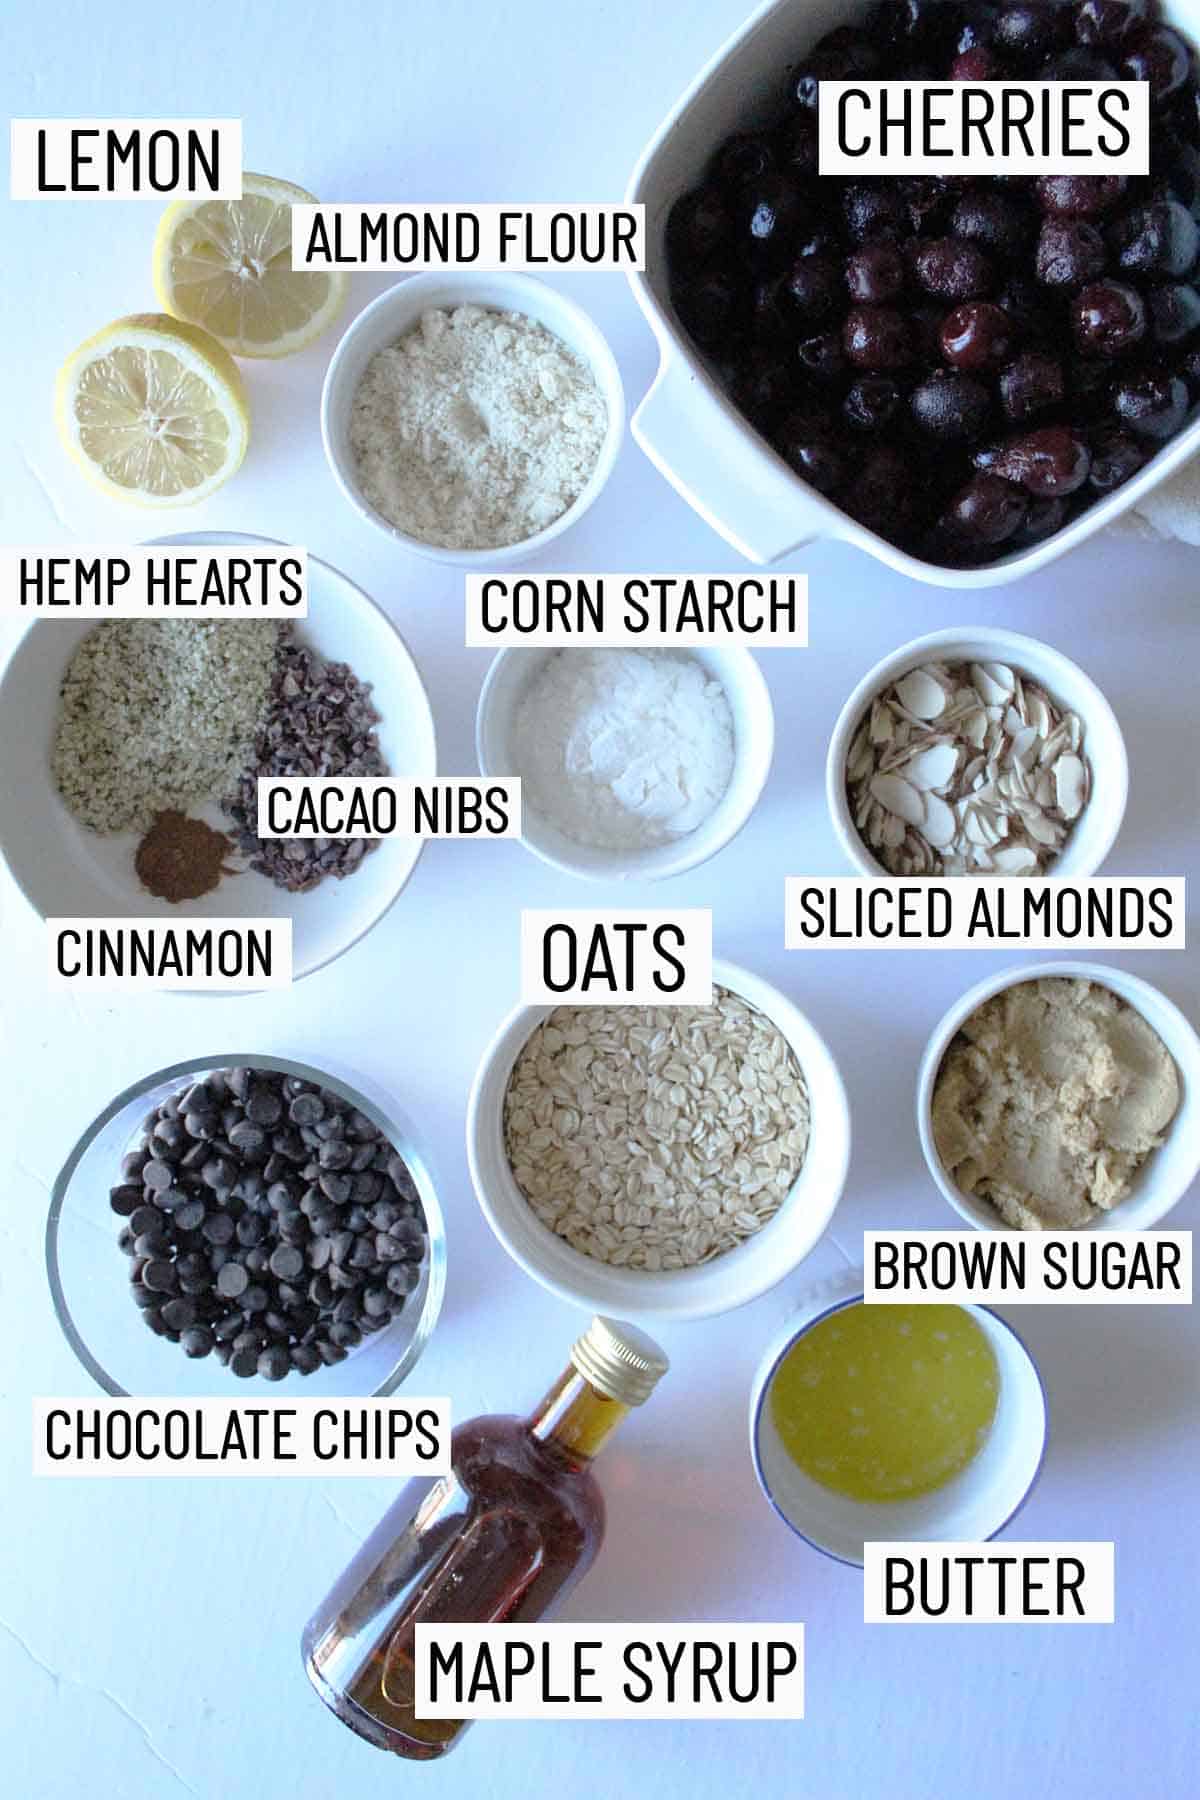 Flat lay of portioned recipe ingredients including brown sugar, butter, chocolate chips, oats, cacao nibs, cinnamon, hemp hearts, lemon, corn starch, almond flour, and cherries. 